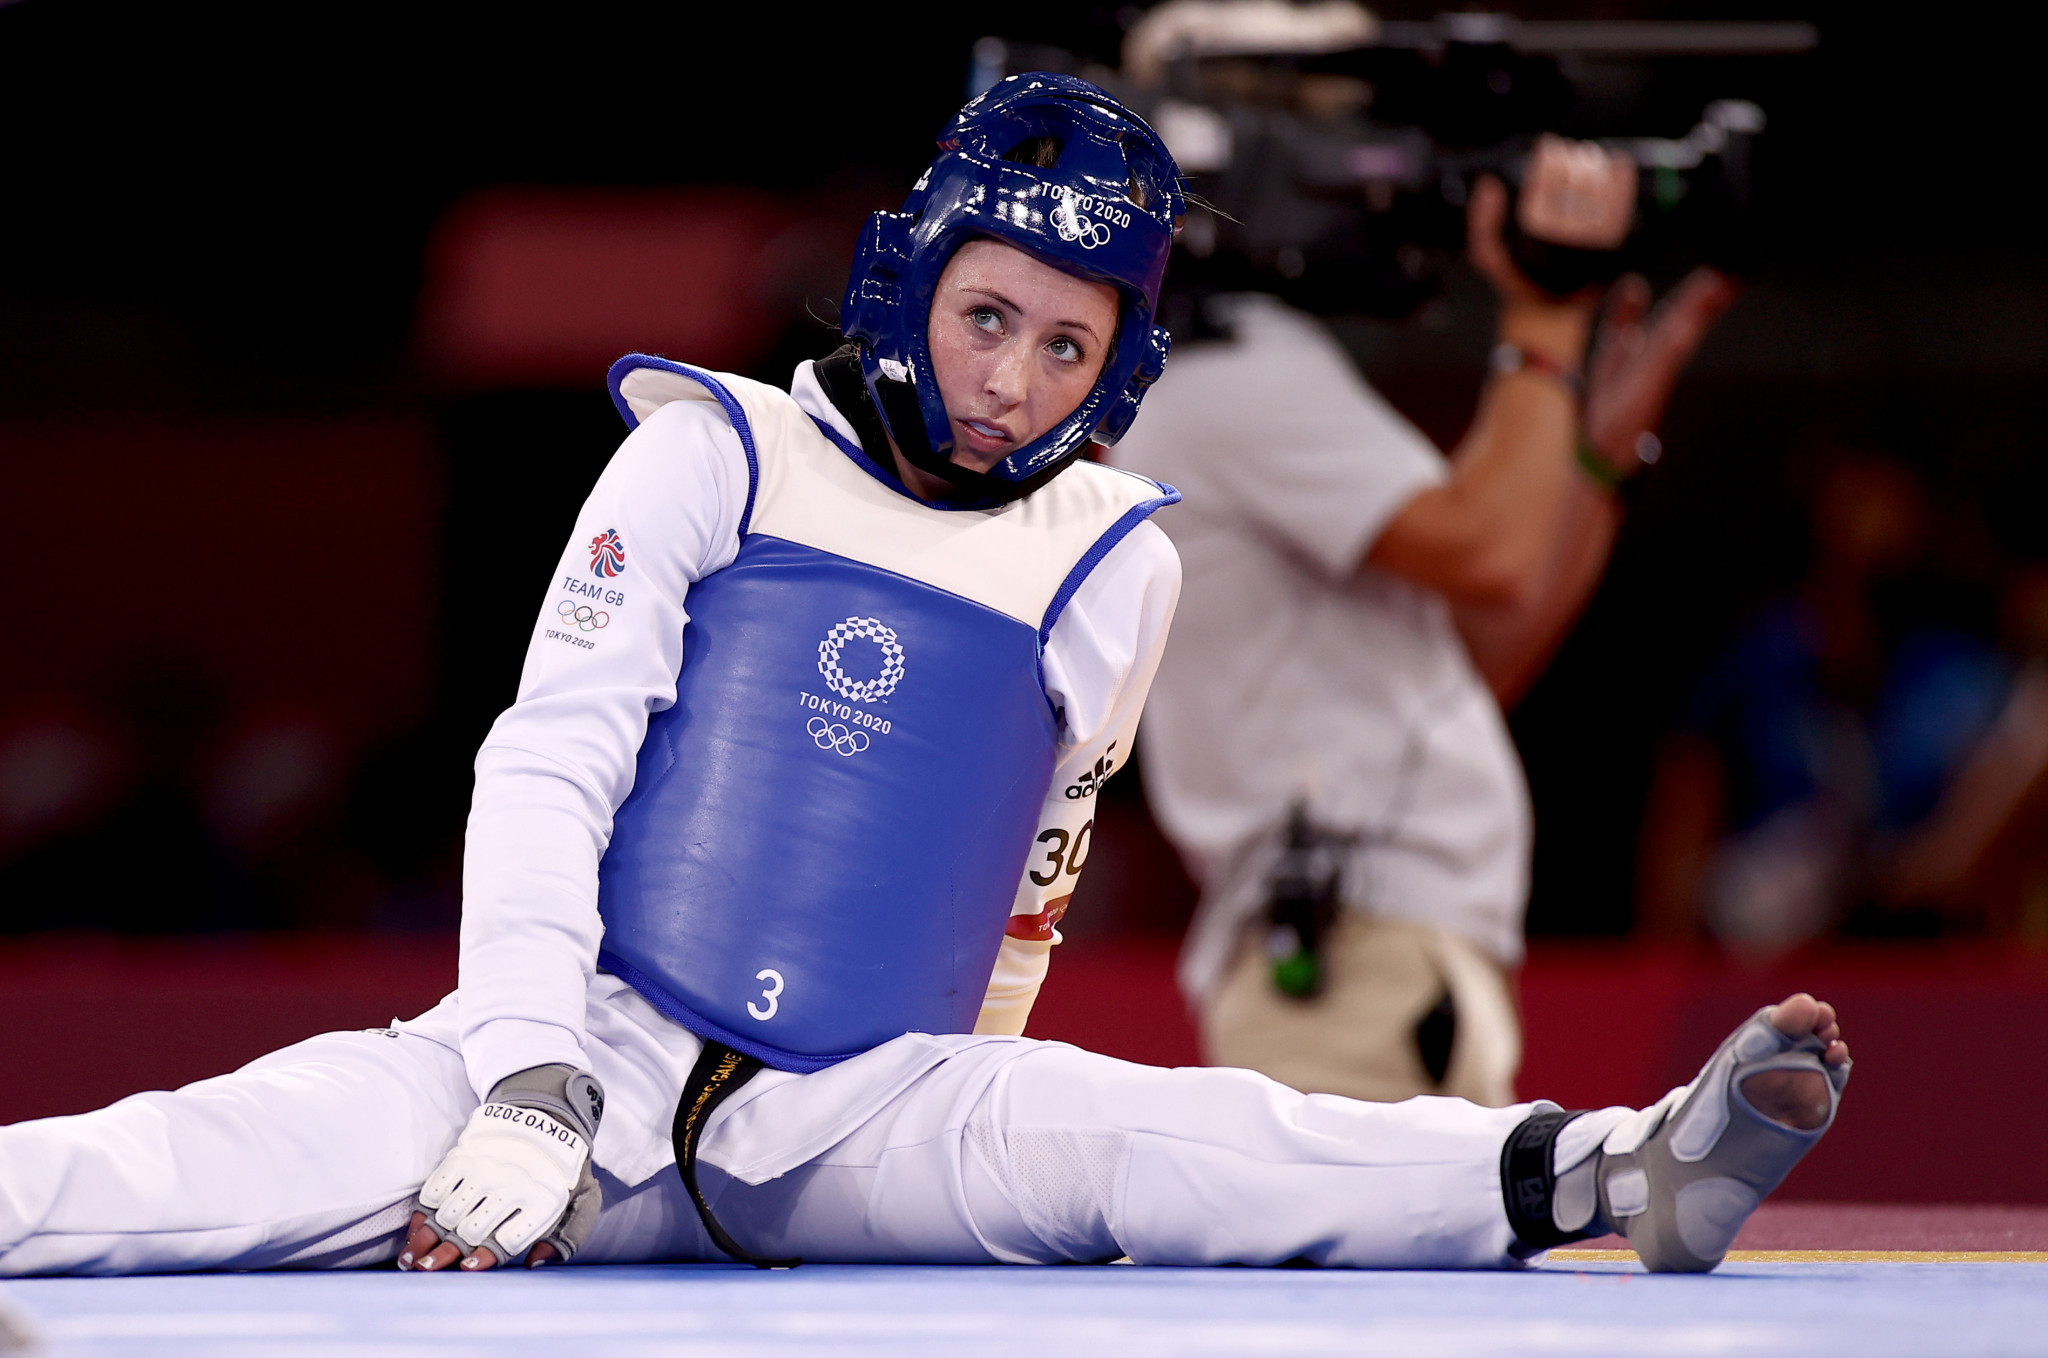 
After London 2012 and Rio 2016, Jade Jones missed out on a chance to make history in Tokyo when she suffered a shock first round exit against Refugee Team athlete Kimia Alizadeh ©Getty Images